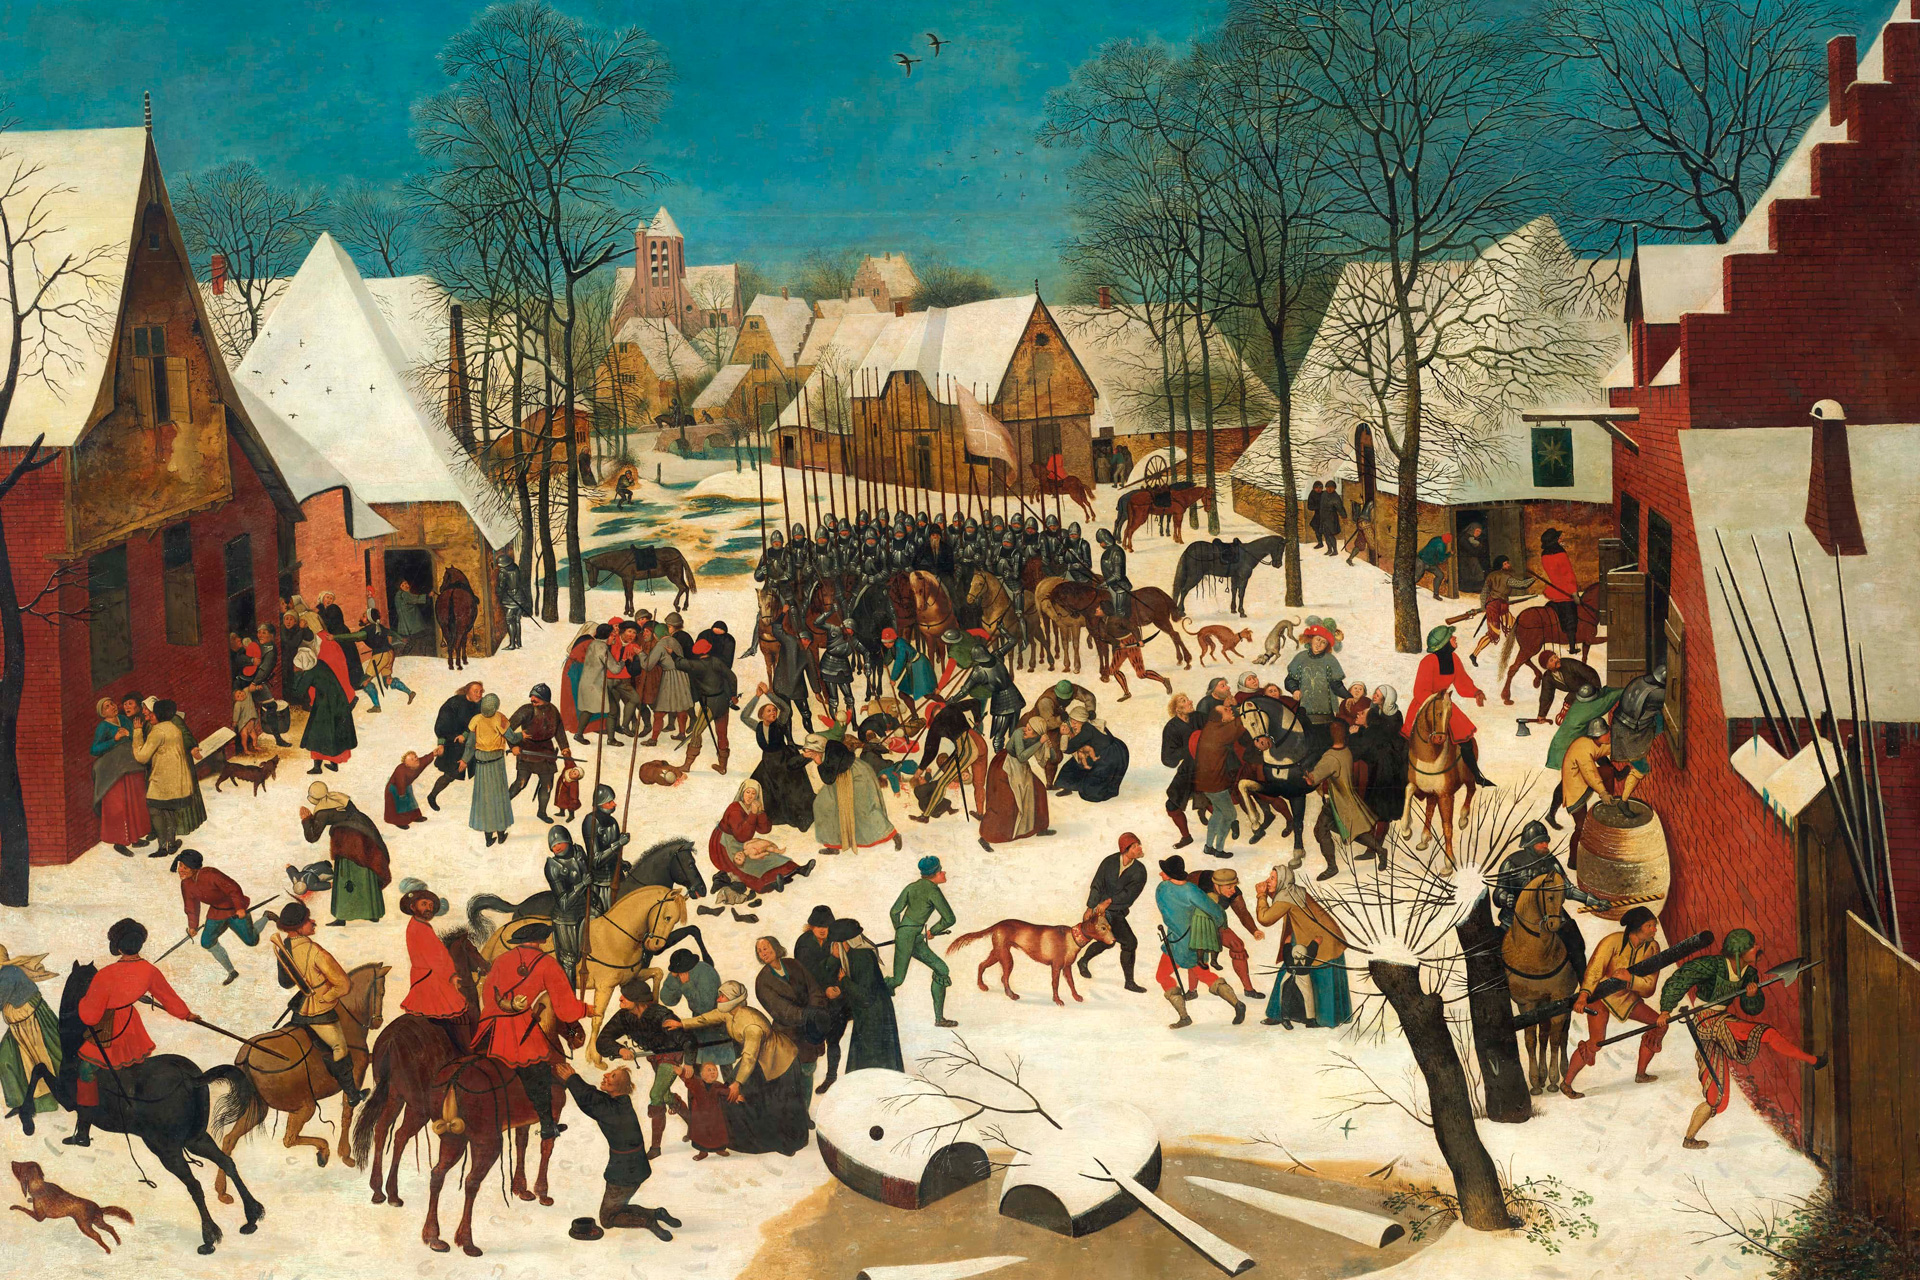 Pieter Brueghel the Younger, The Massacre of the Innocents